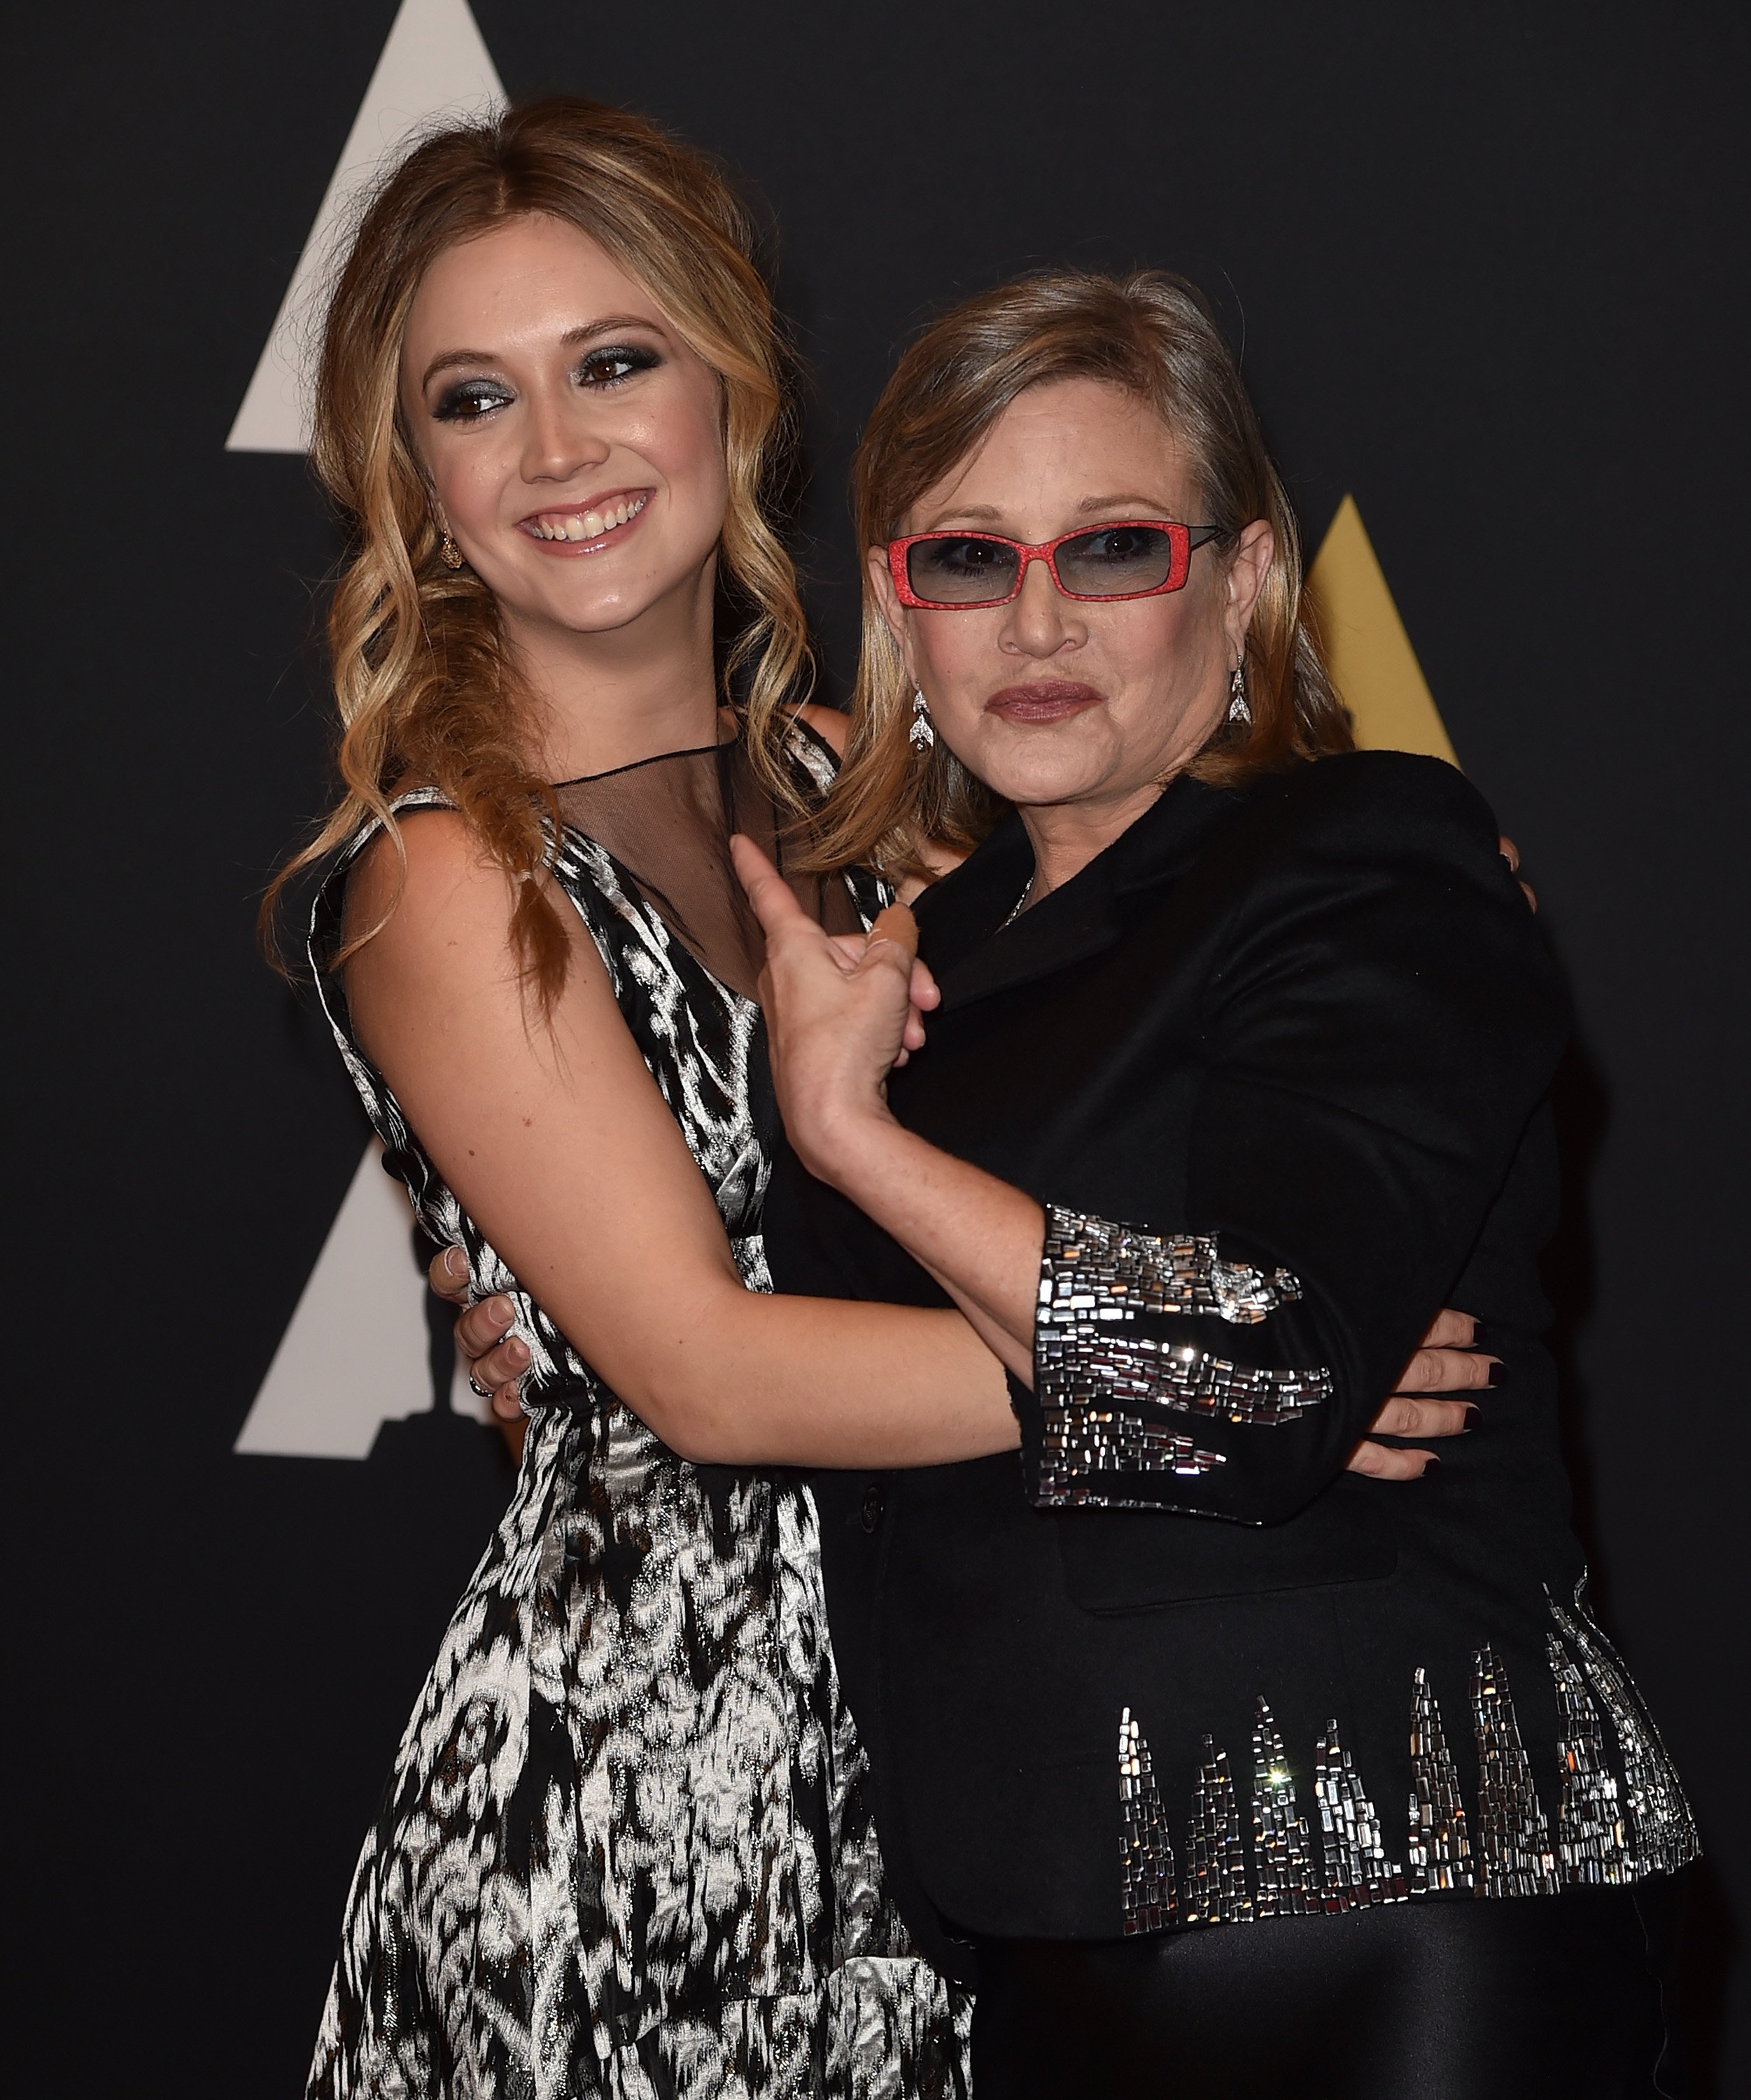 Carrie Fisher and Billie Catherine Lourd attend the Academy of Motion Picture Arts and Sciences' 7th annual Governors Awards at The Ray Dolby Ballroom at Hollywood & Highland Center on November 14, 2015 in Hollywood, California | Photo: Getty Images